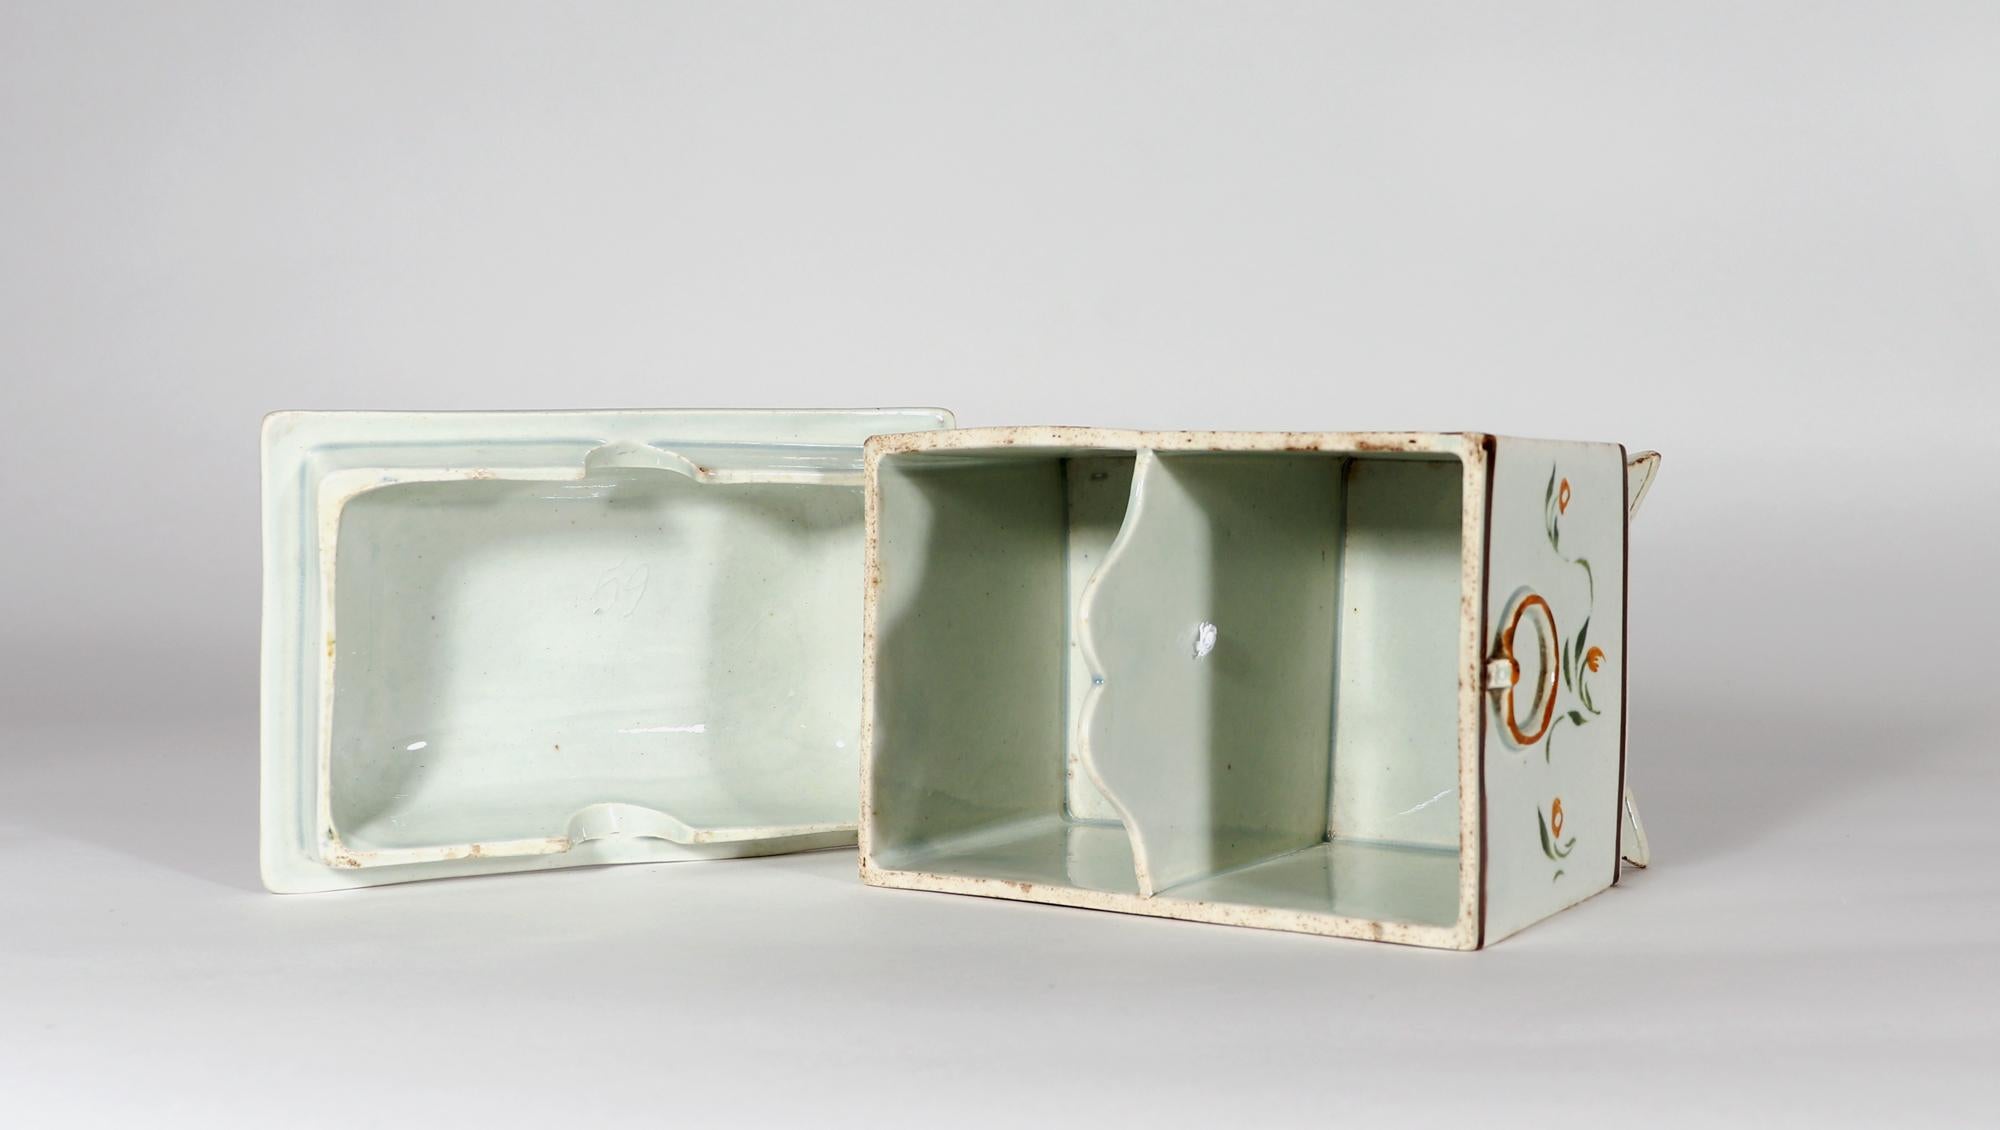 19th Century Unusual Swansea Prattware Pearlware Pottery Covered Botanical Tea Caddy Box For Sale